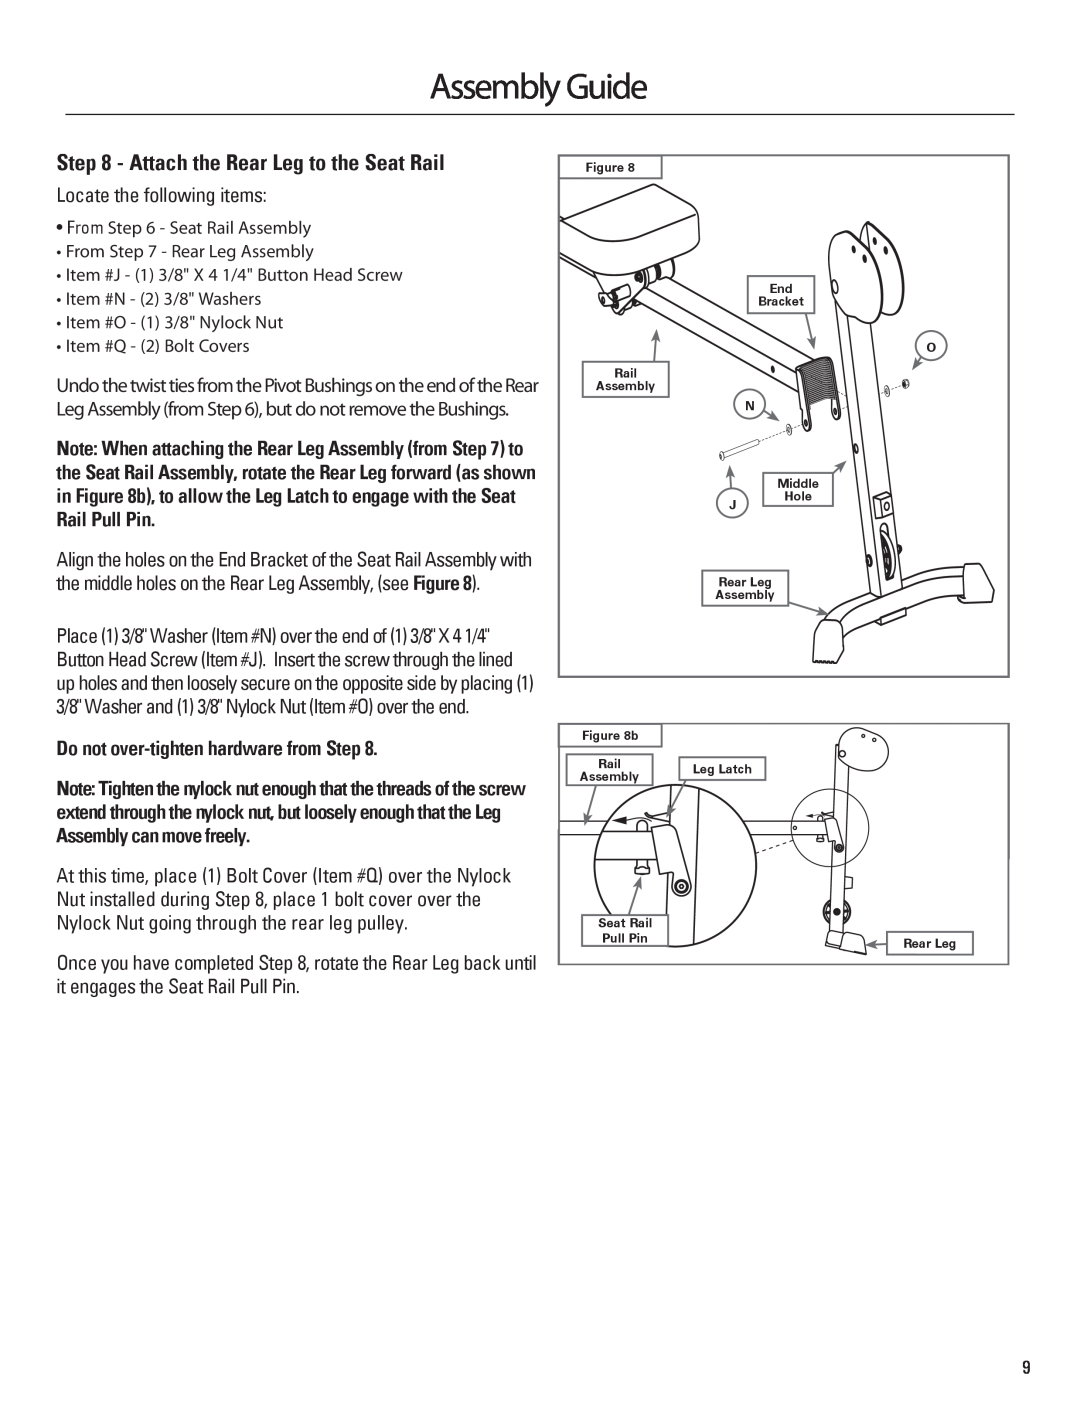 Bowflex 001-6961 manual Attach the Rear Leg to the Seat Rail, Assembly Guide, Rail Pull Pin, Assembly can move freely 